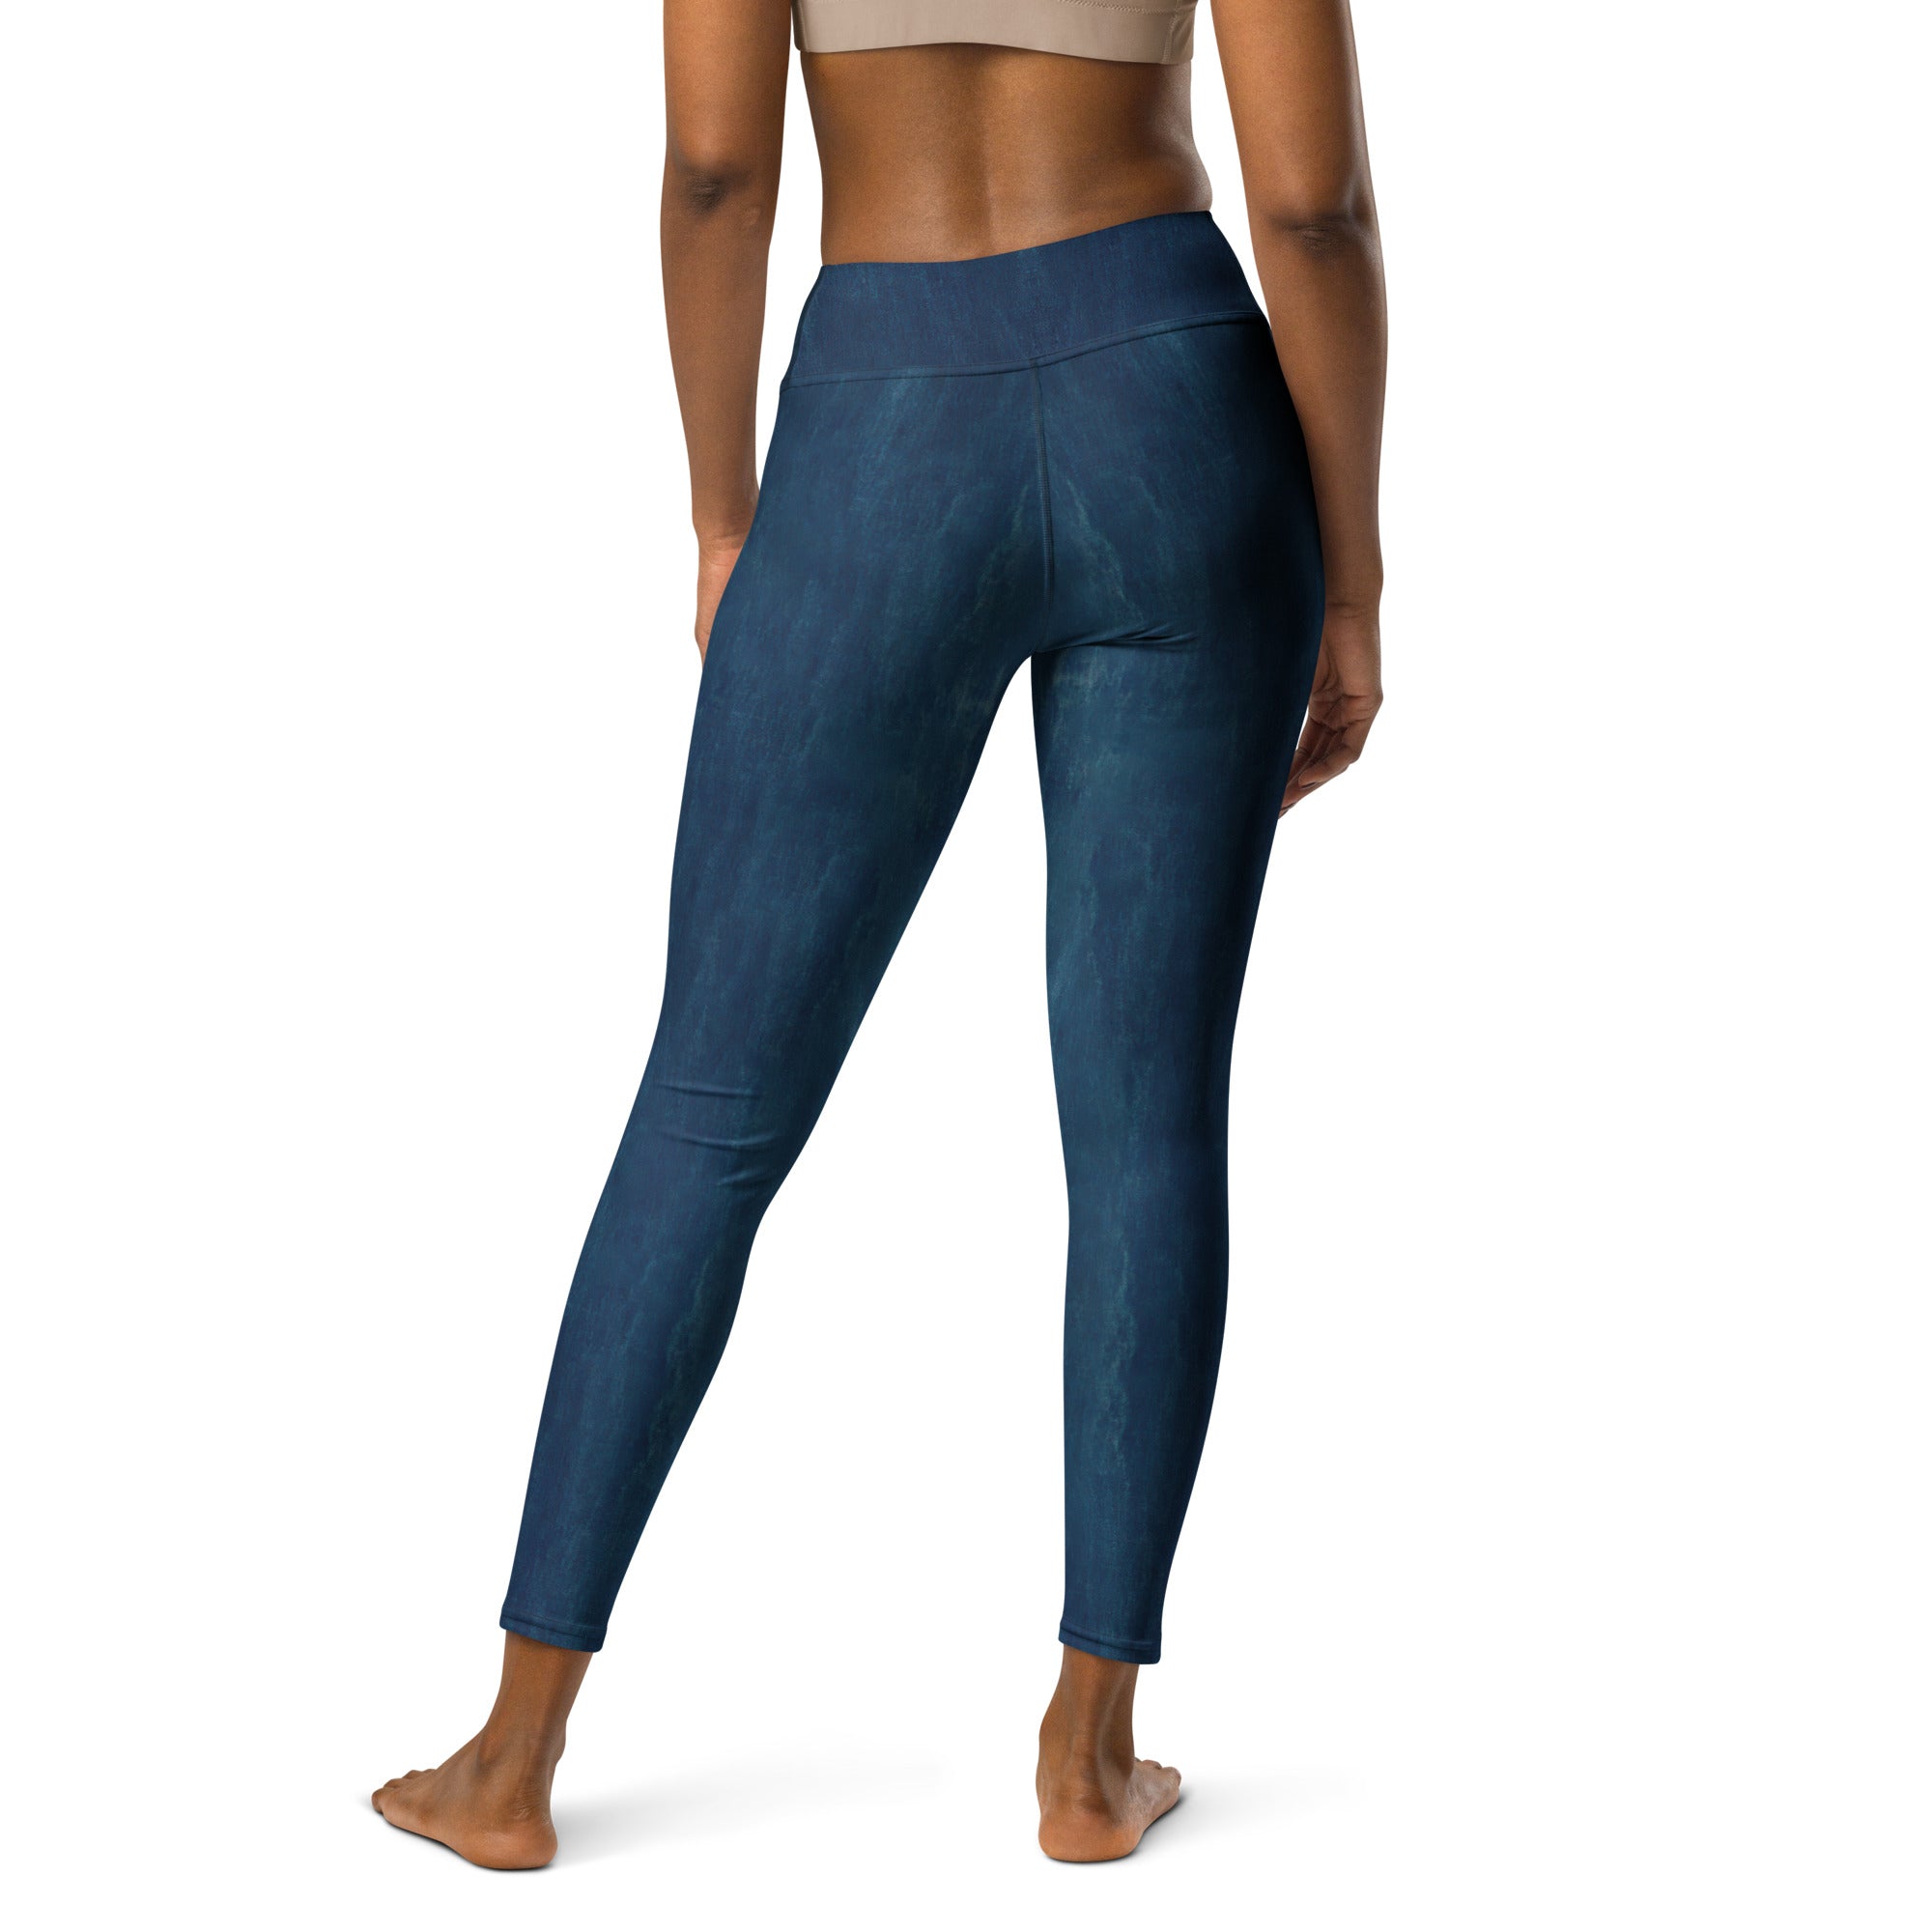 Durable and Stretchy Granite Harmony Leggings for Active Wear